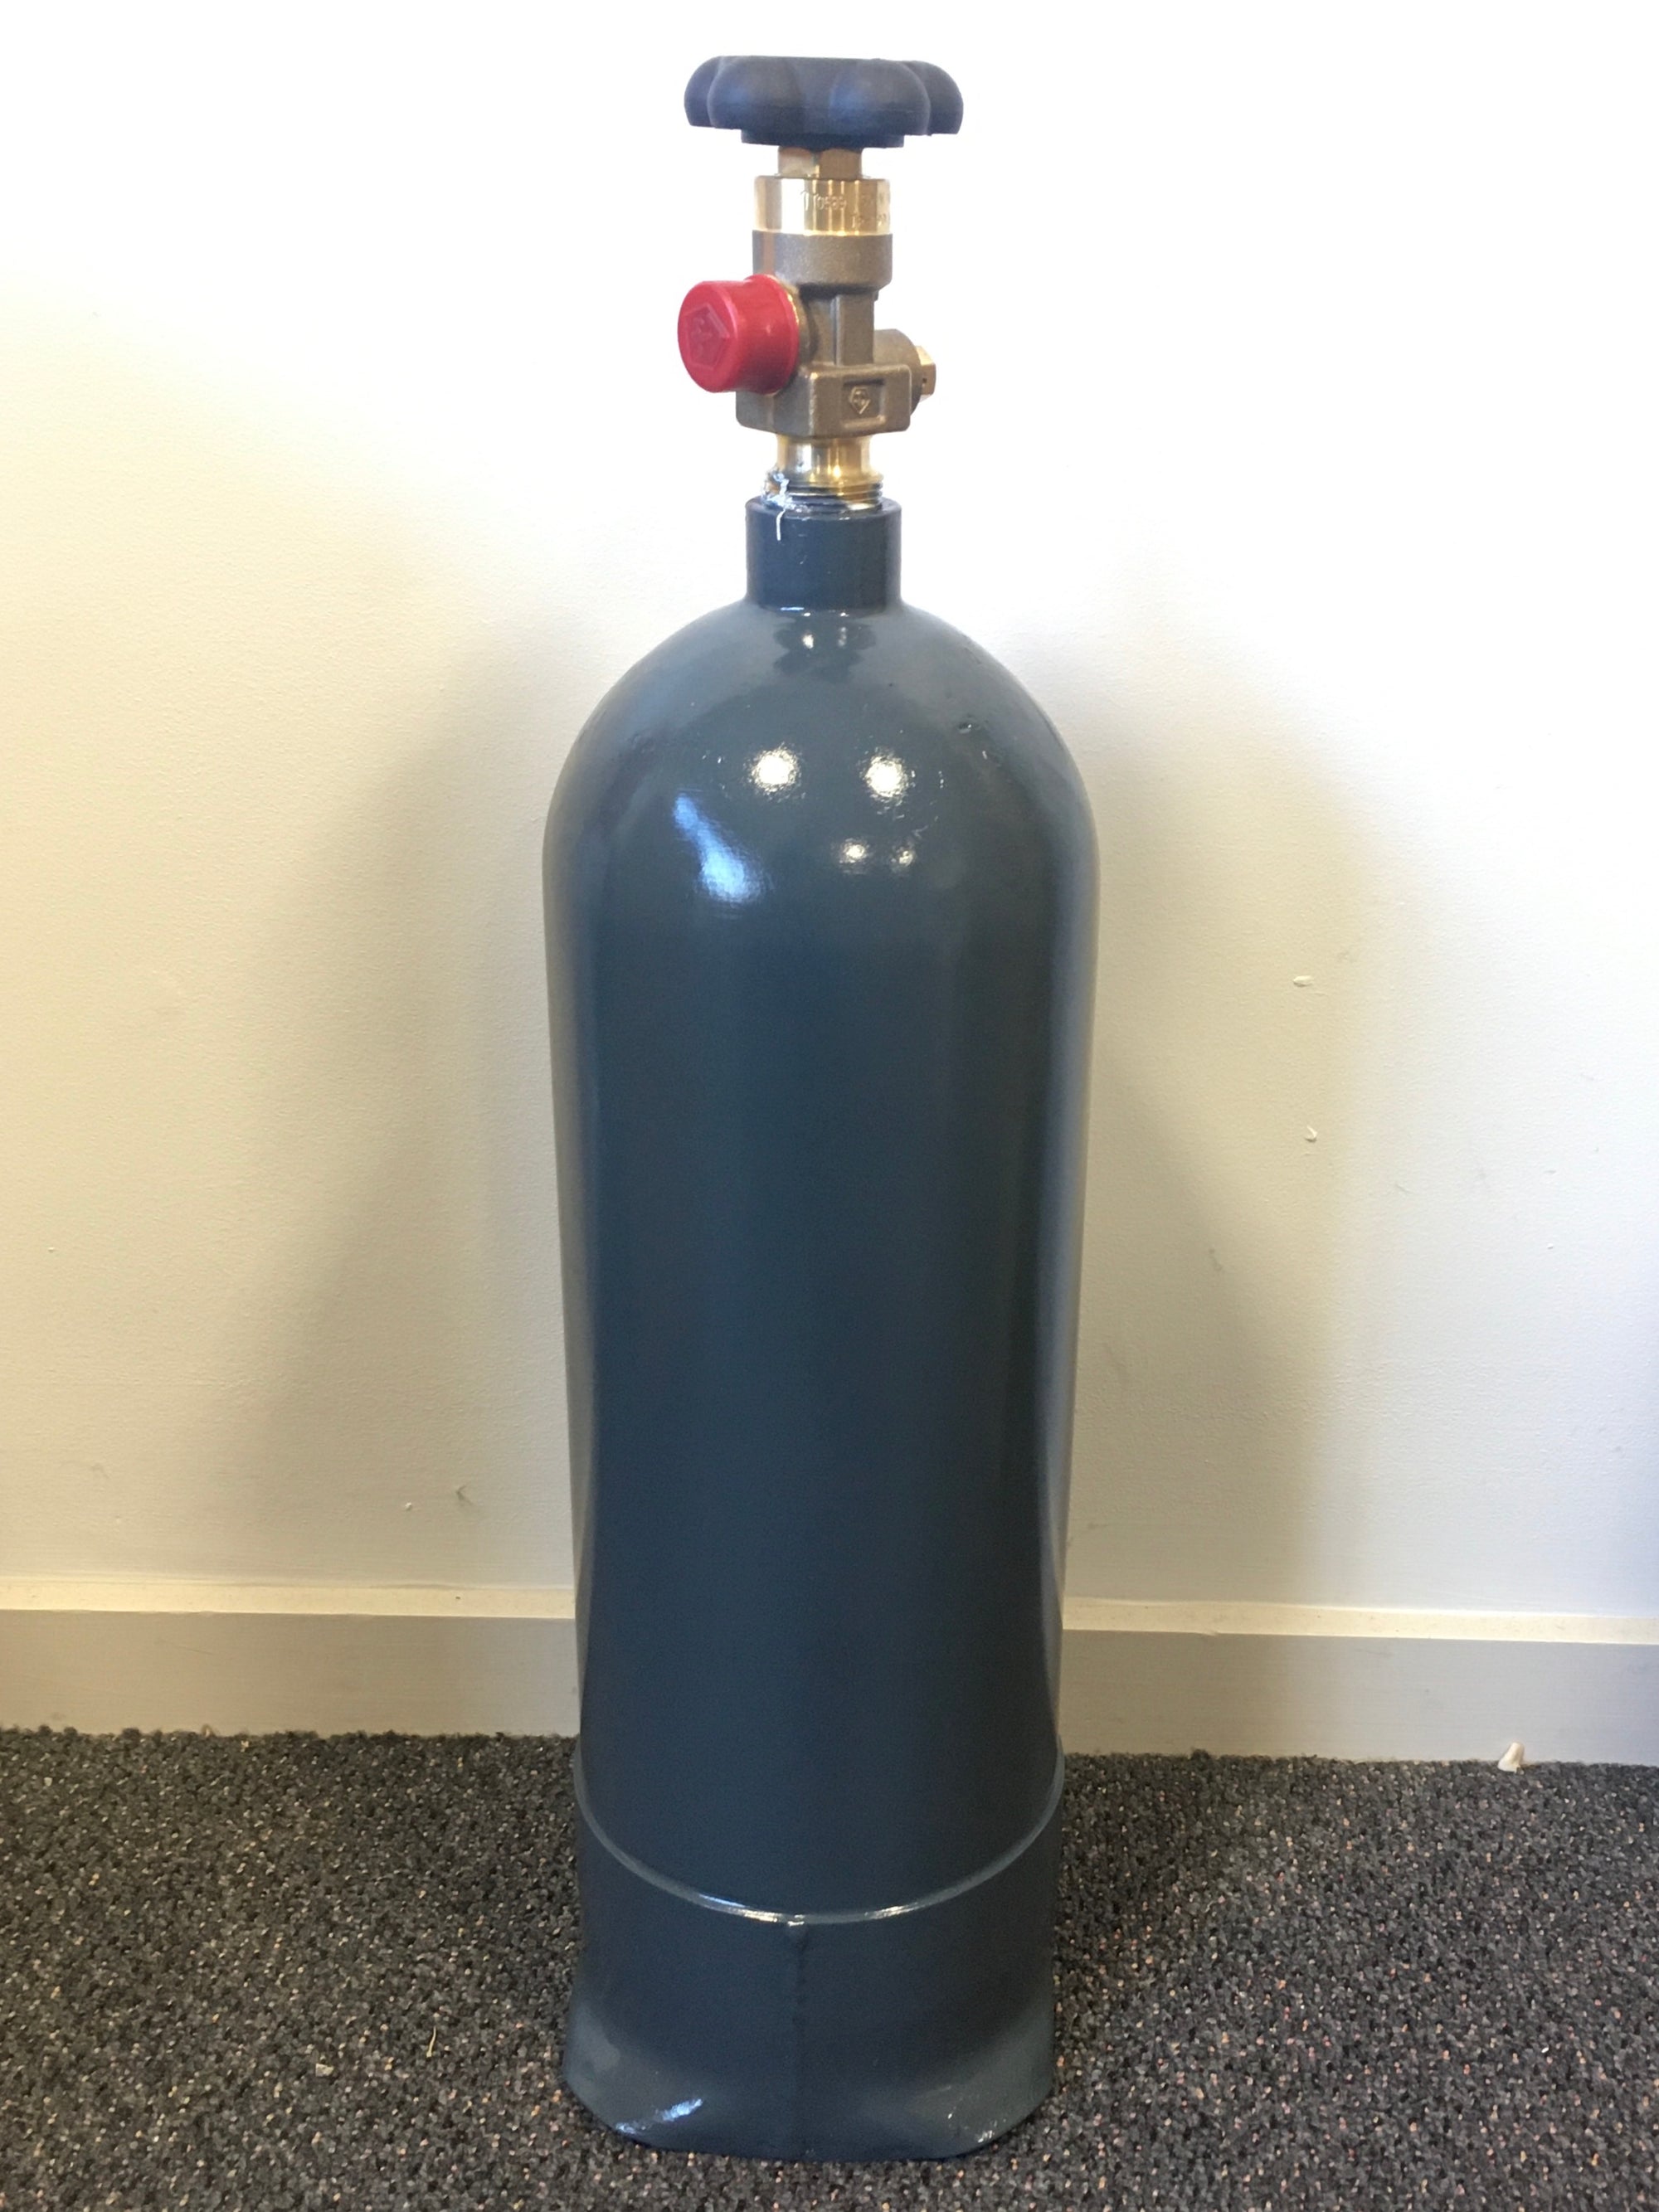 CO2 Cylinder - Reconditioned & Certified Steel 7 lb (3.2kg) Cylinder - All Things Fermented | Home Brew Shop NZ | Supplies | Equipment